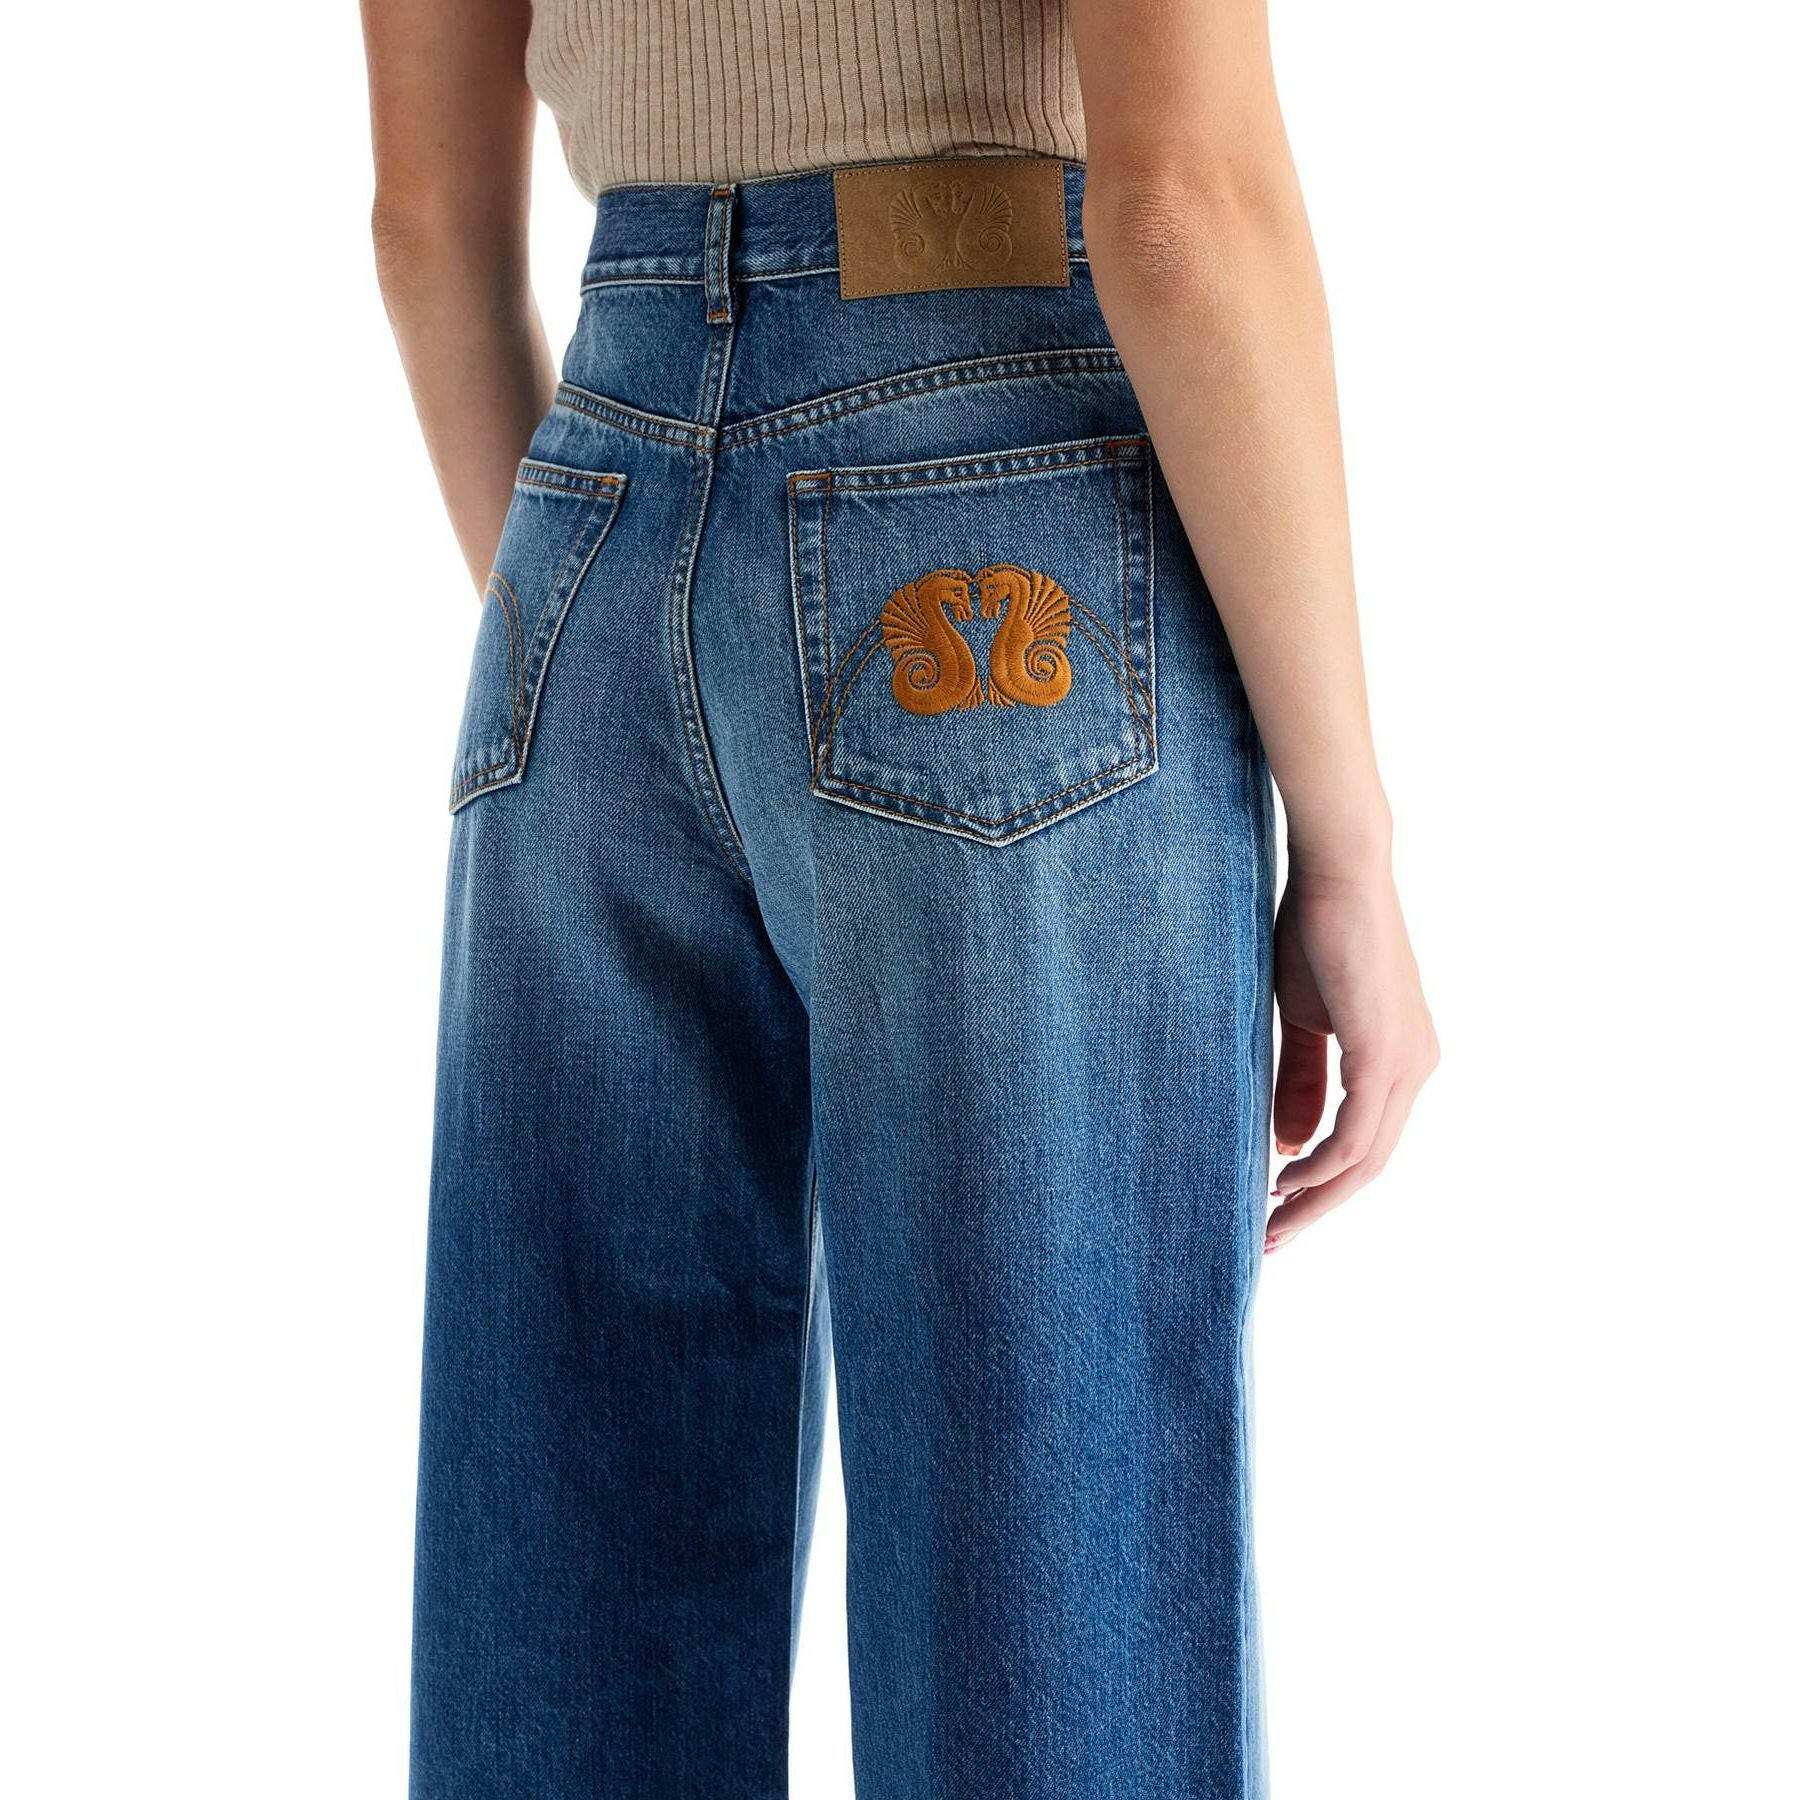 Norico High-Rise Straight-Cut Jeans.